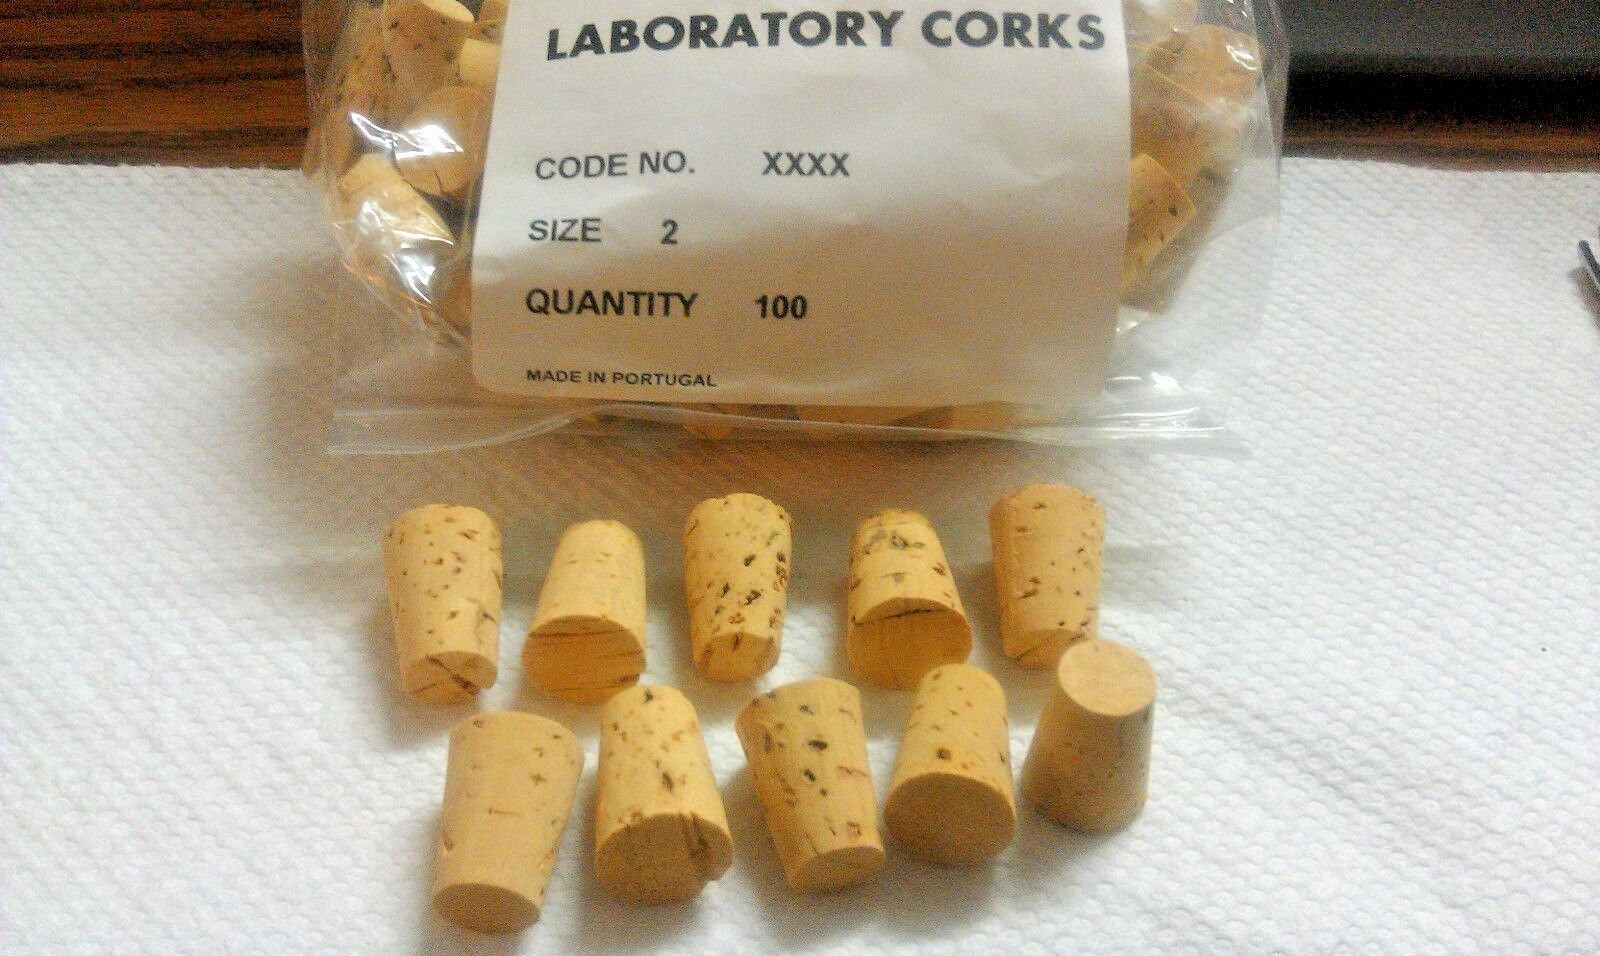 Fits 1-5/8" Large End ID Push-In Tapered CORK 3 Size 20 Round Cork Plugs, 